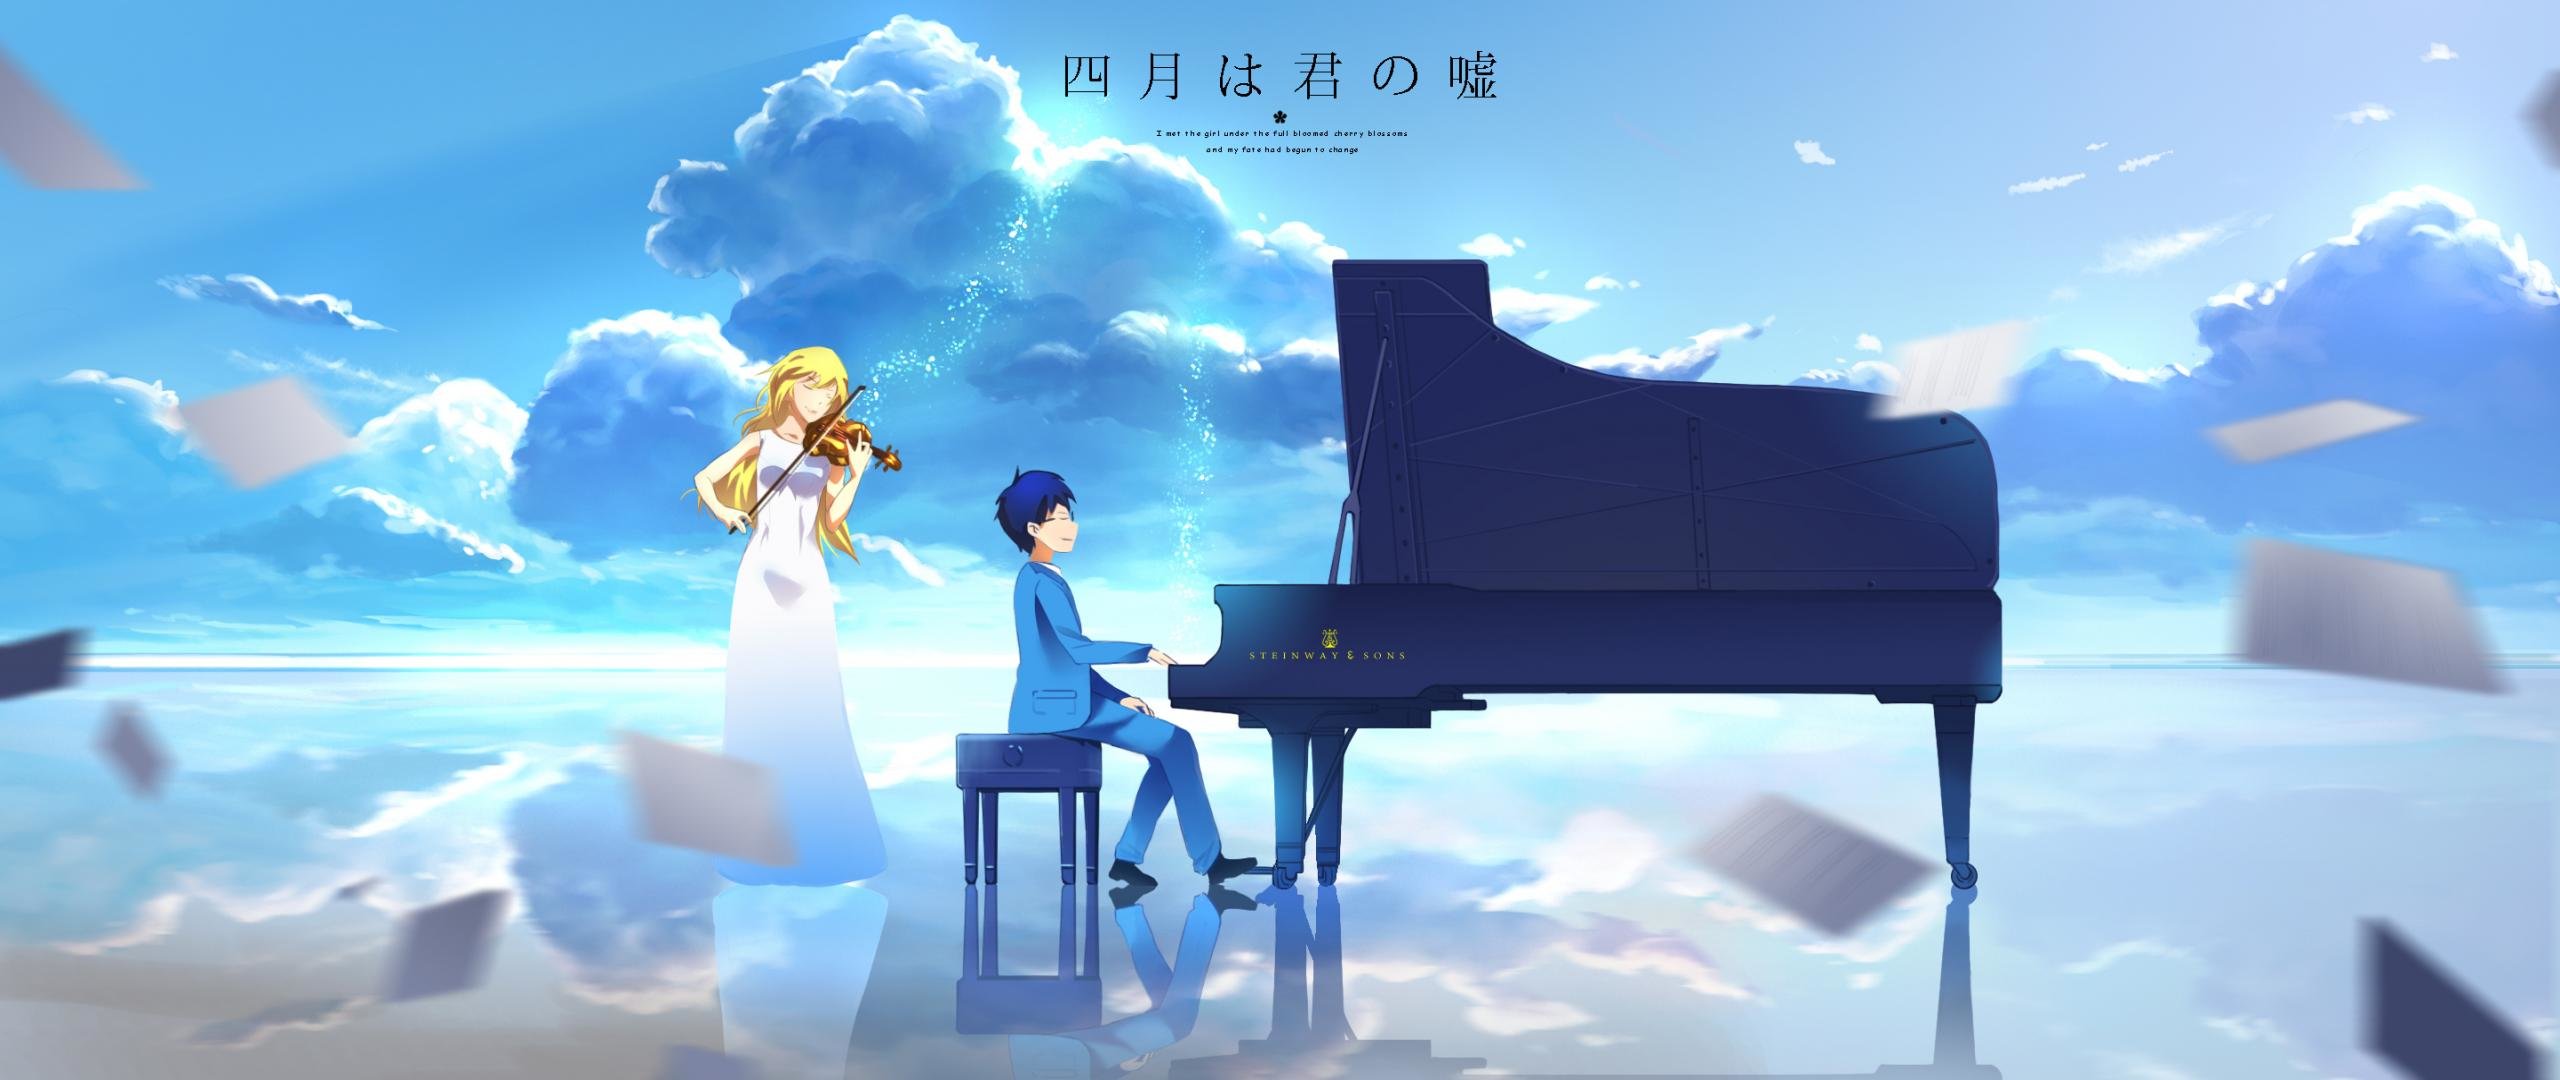 Download Hd 2560x1080 Your Lie In April Computer Wallpaper